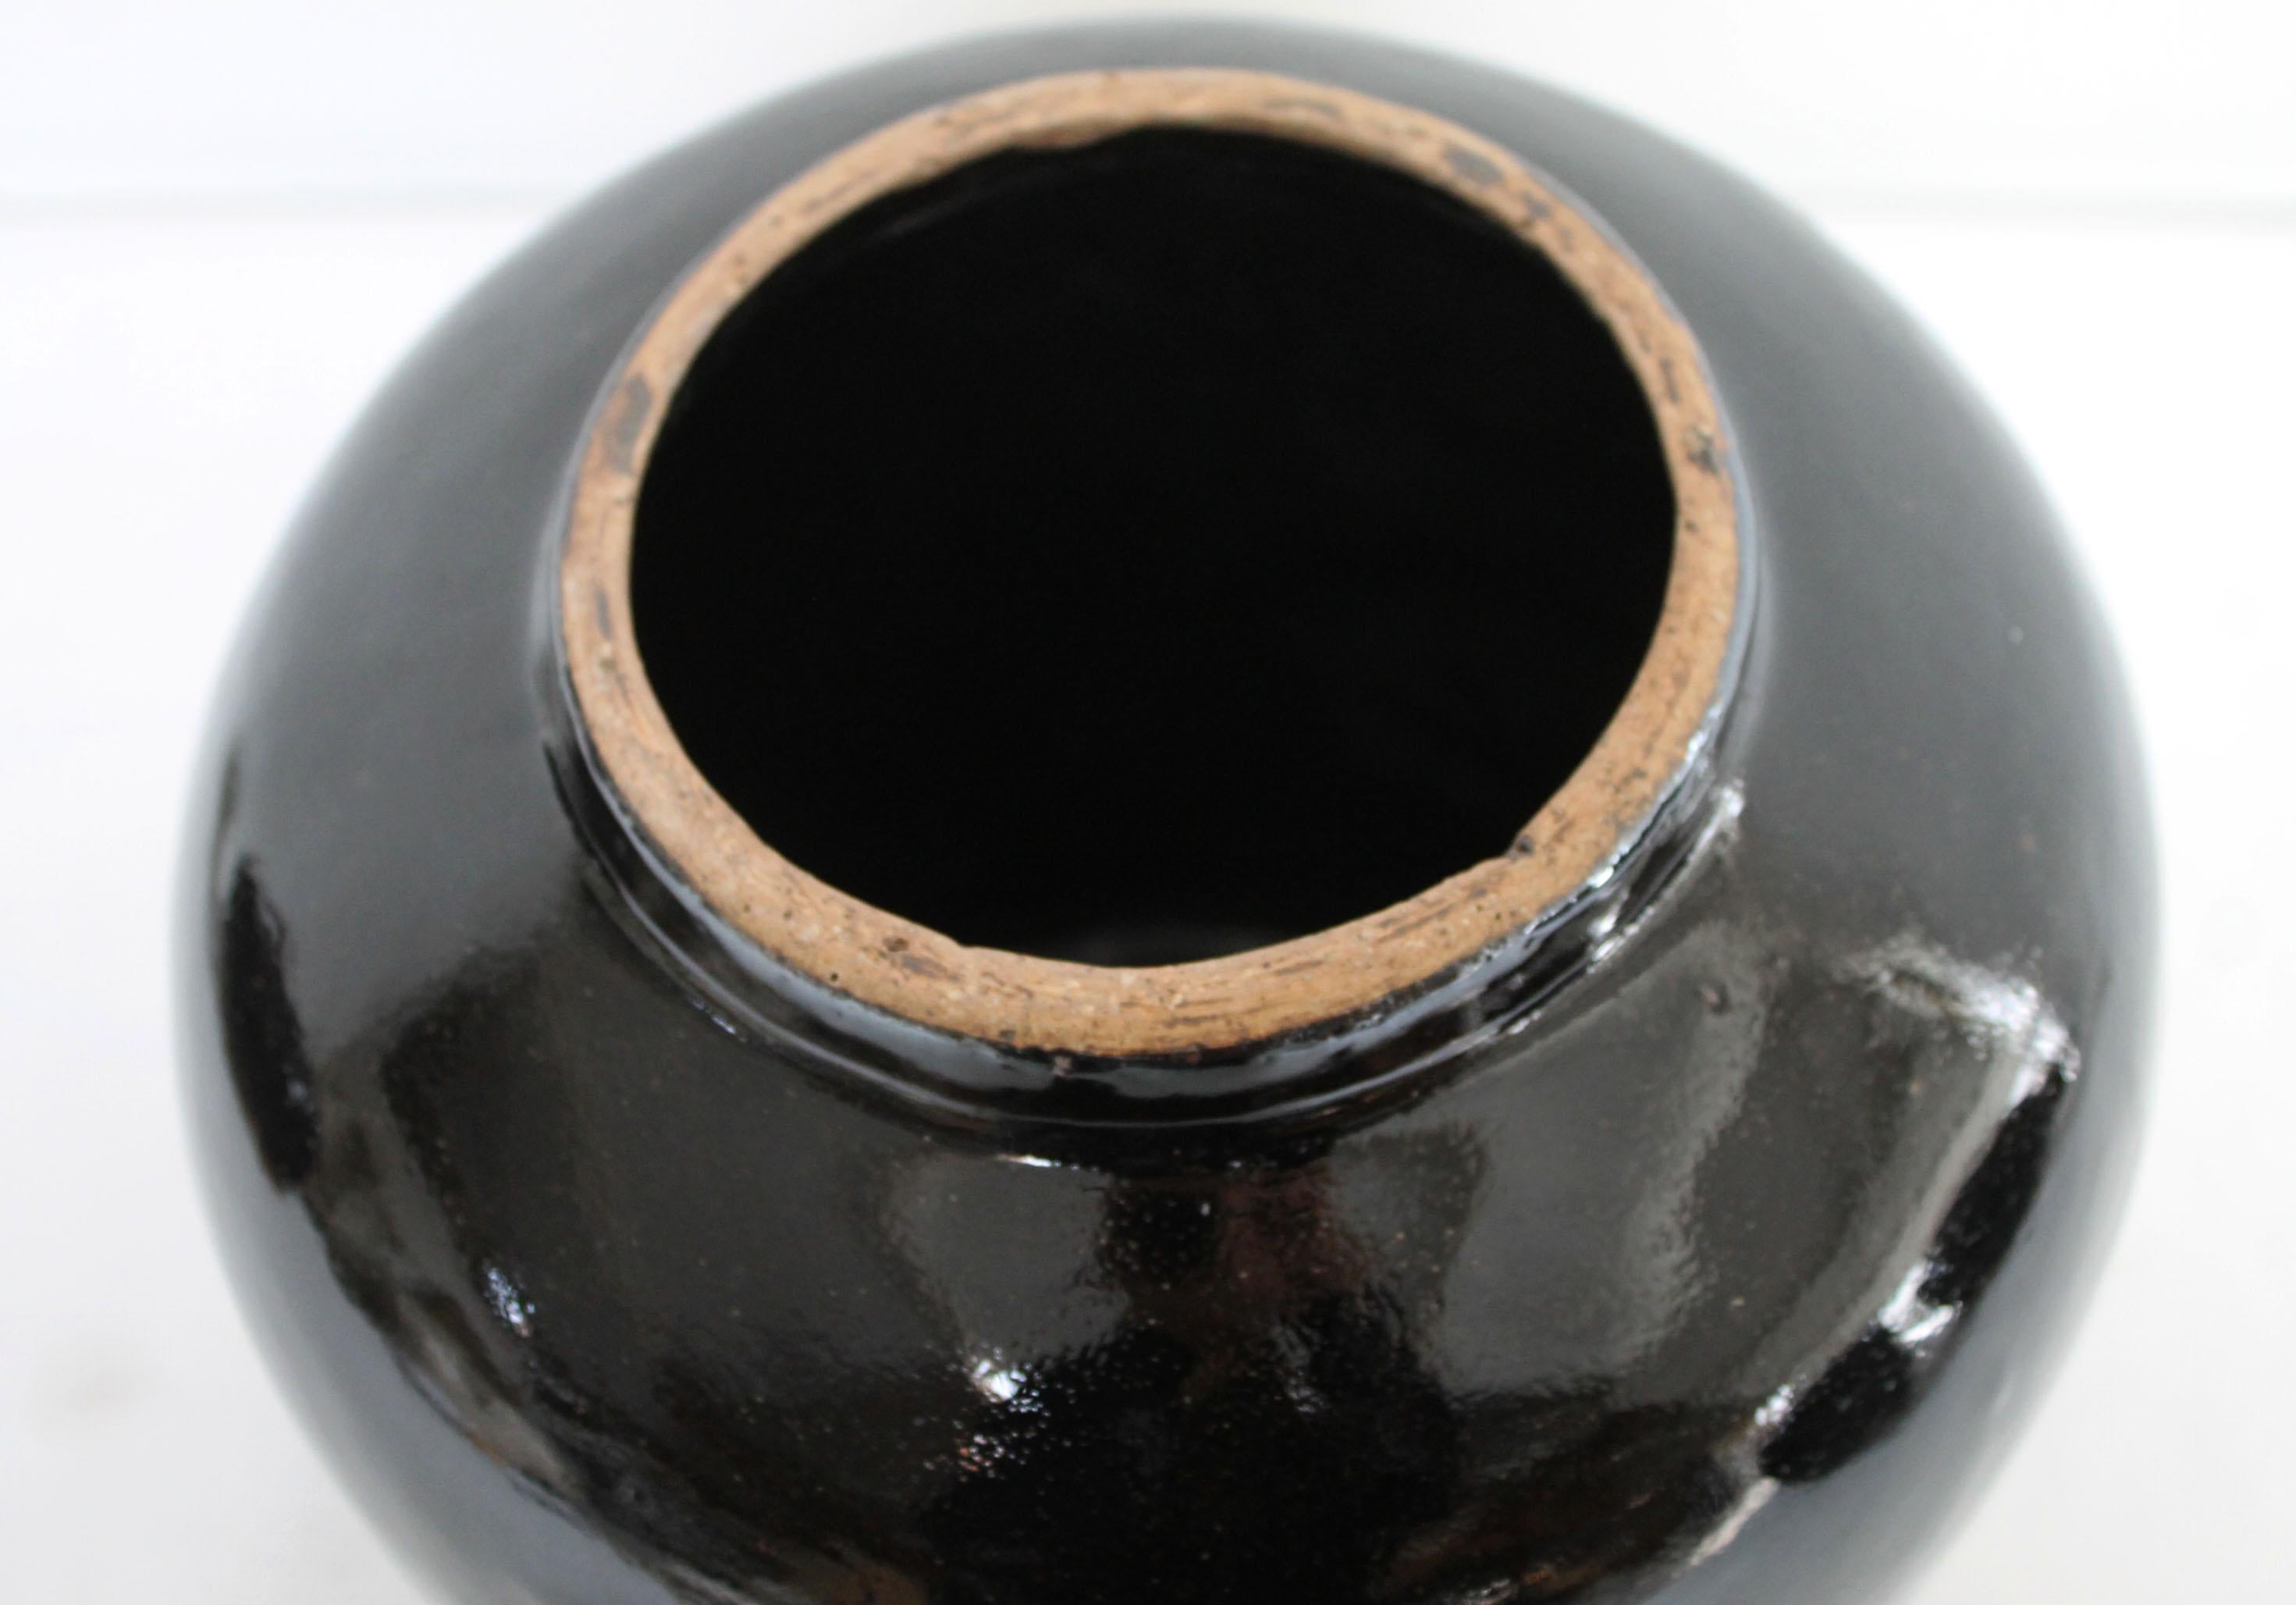 Beautifully glazed and rich in character, this vintage glazed oil pot adds just the right amount of texture + warmth where you need it. Stunning black glazed finish with warm terracotta accents.

Approximate Sizing: 8.5